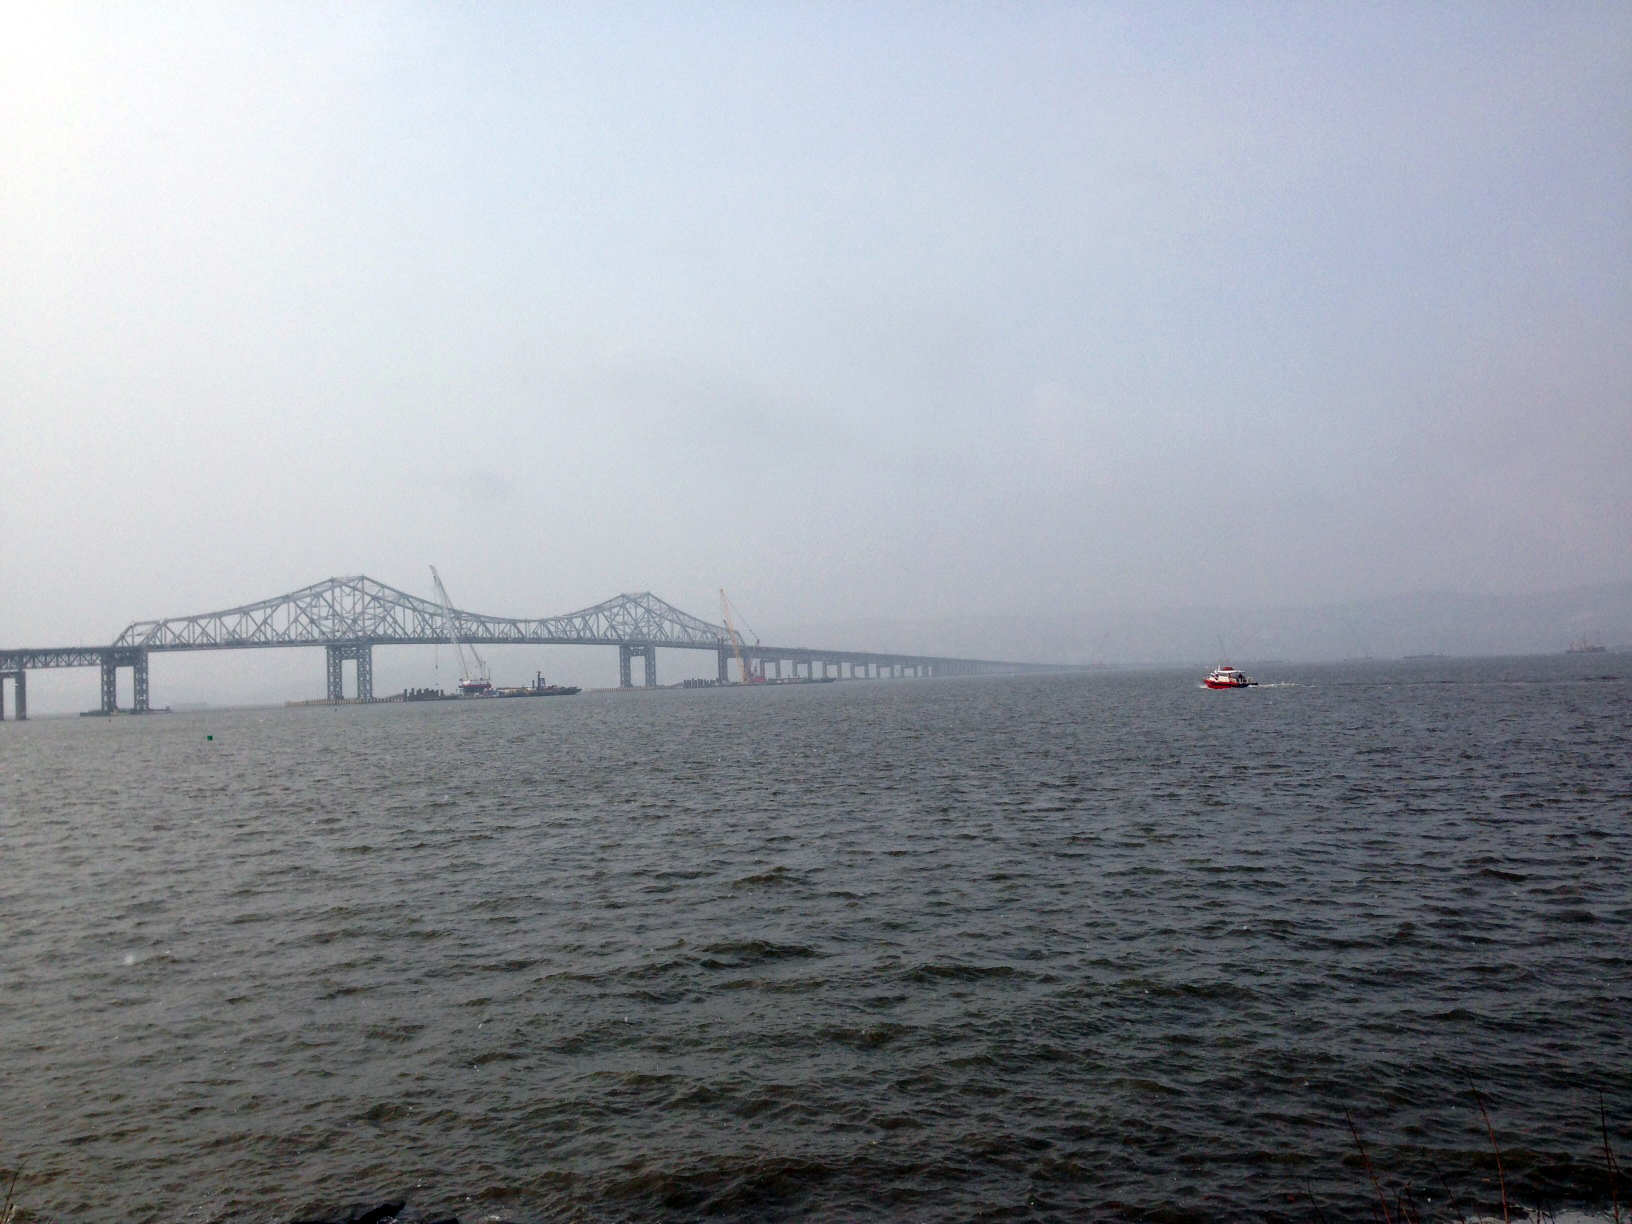 Fog and storms are routine, unpredictable encounters on the Tappan Zee.